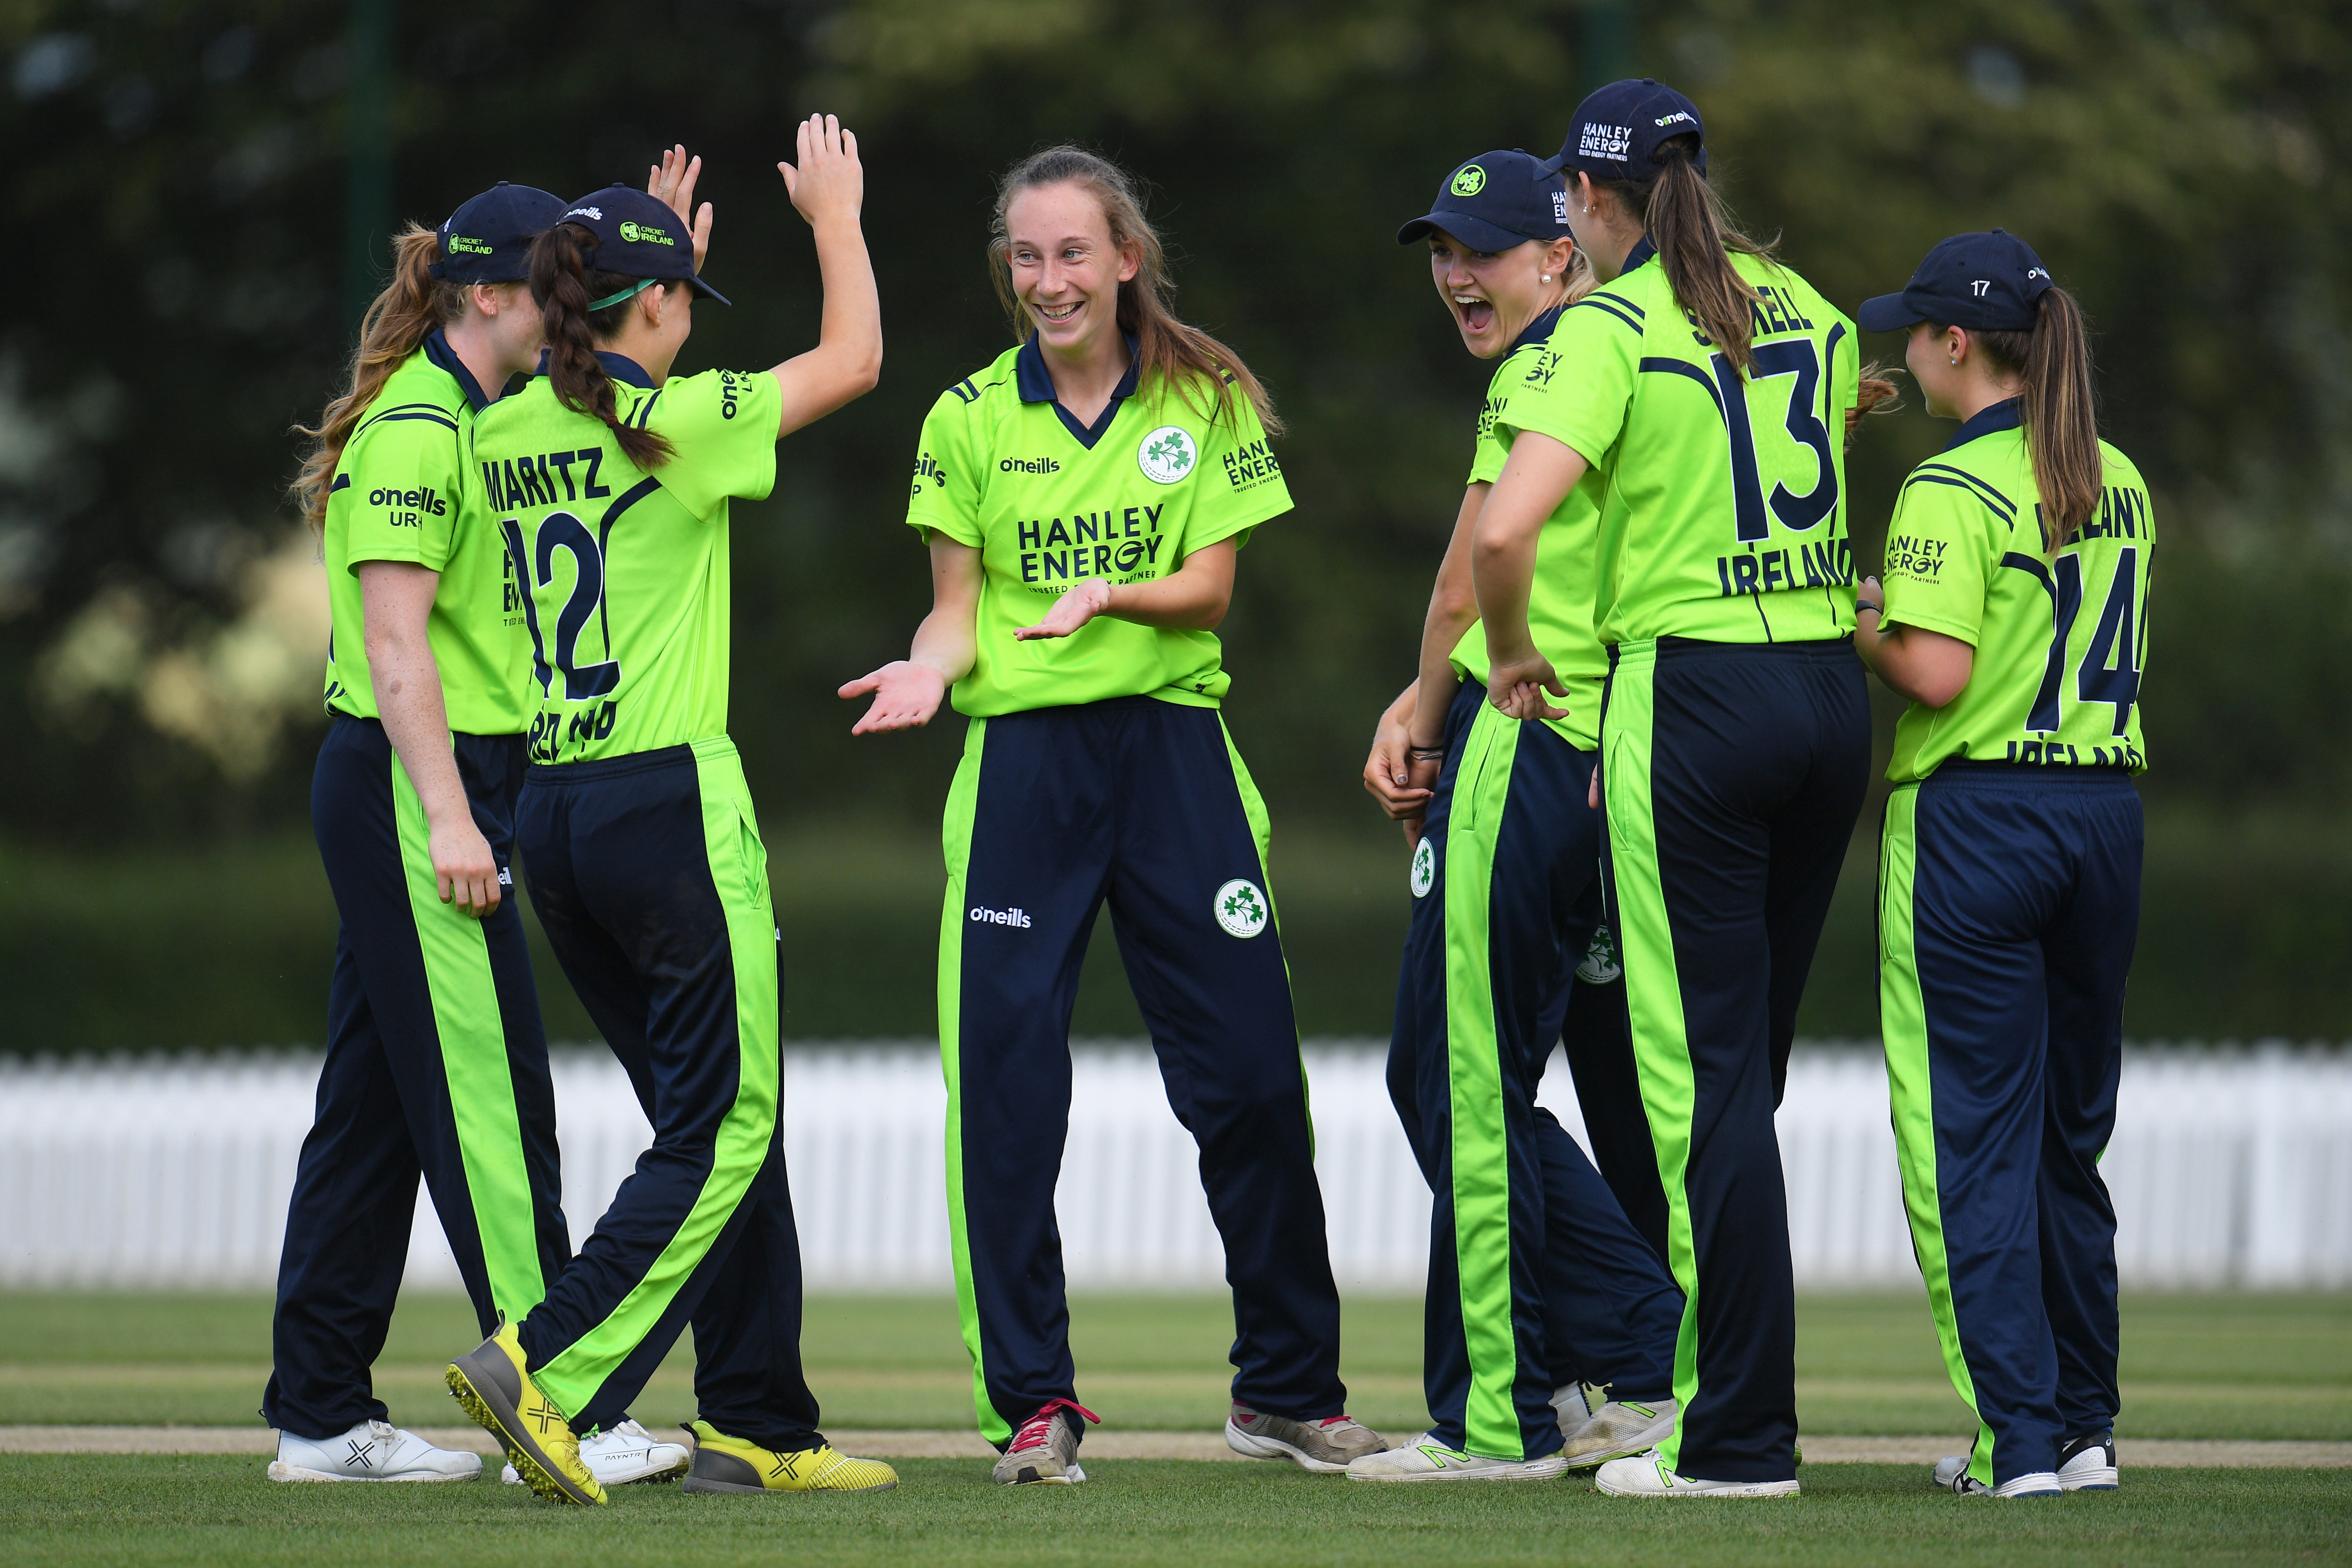 Prendergast moves up in MRF Tyres ICC Women's T20I Player Rankings